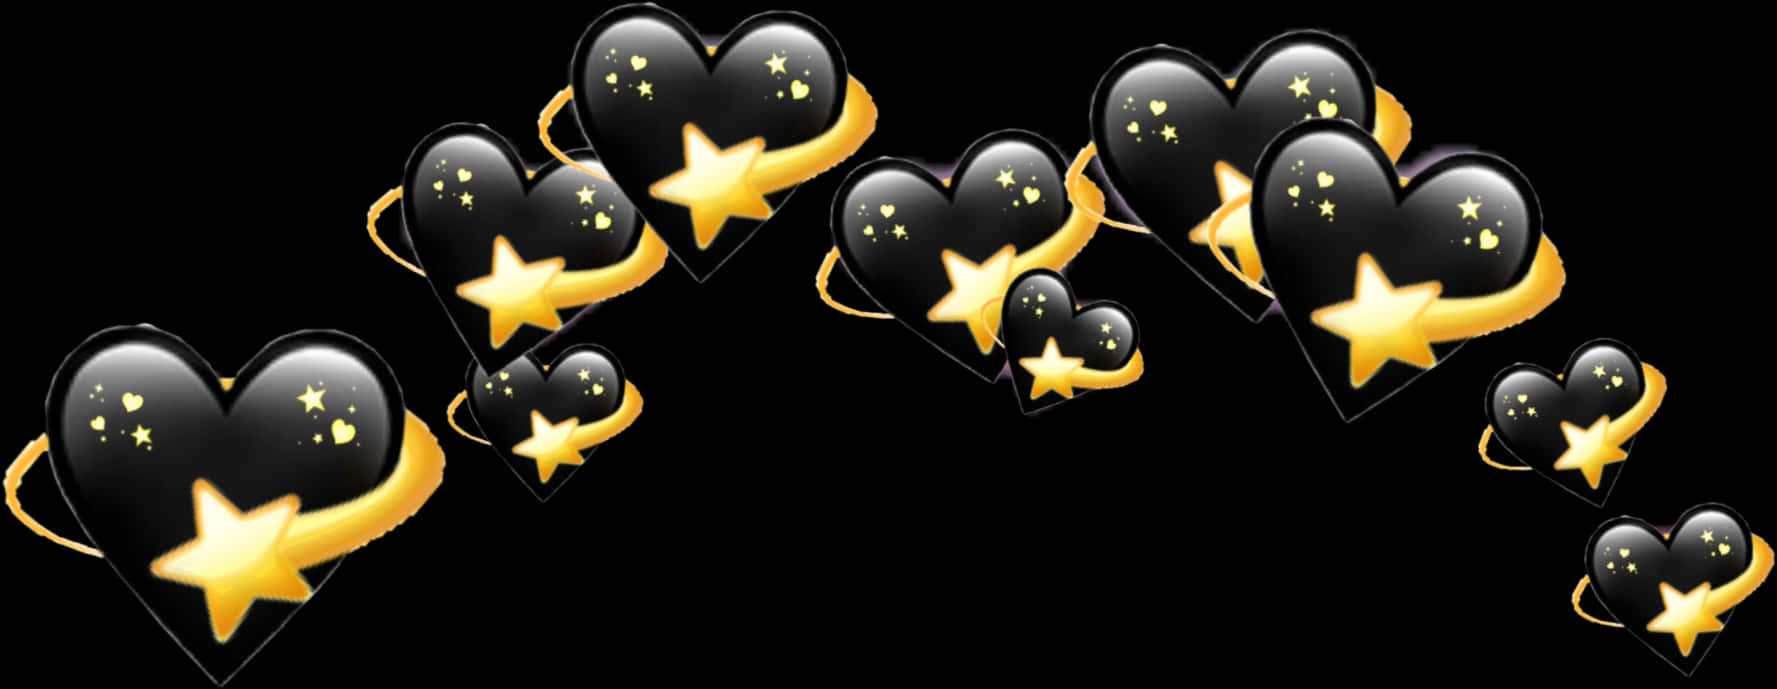 A Black Hearts With Gold Stars And A Ribbon